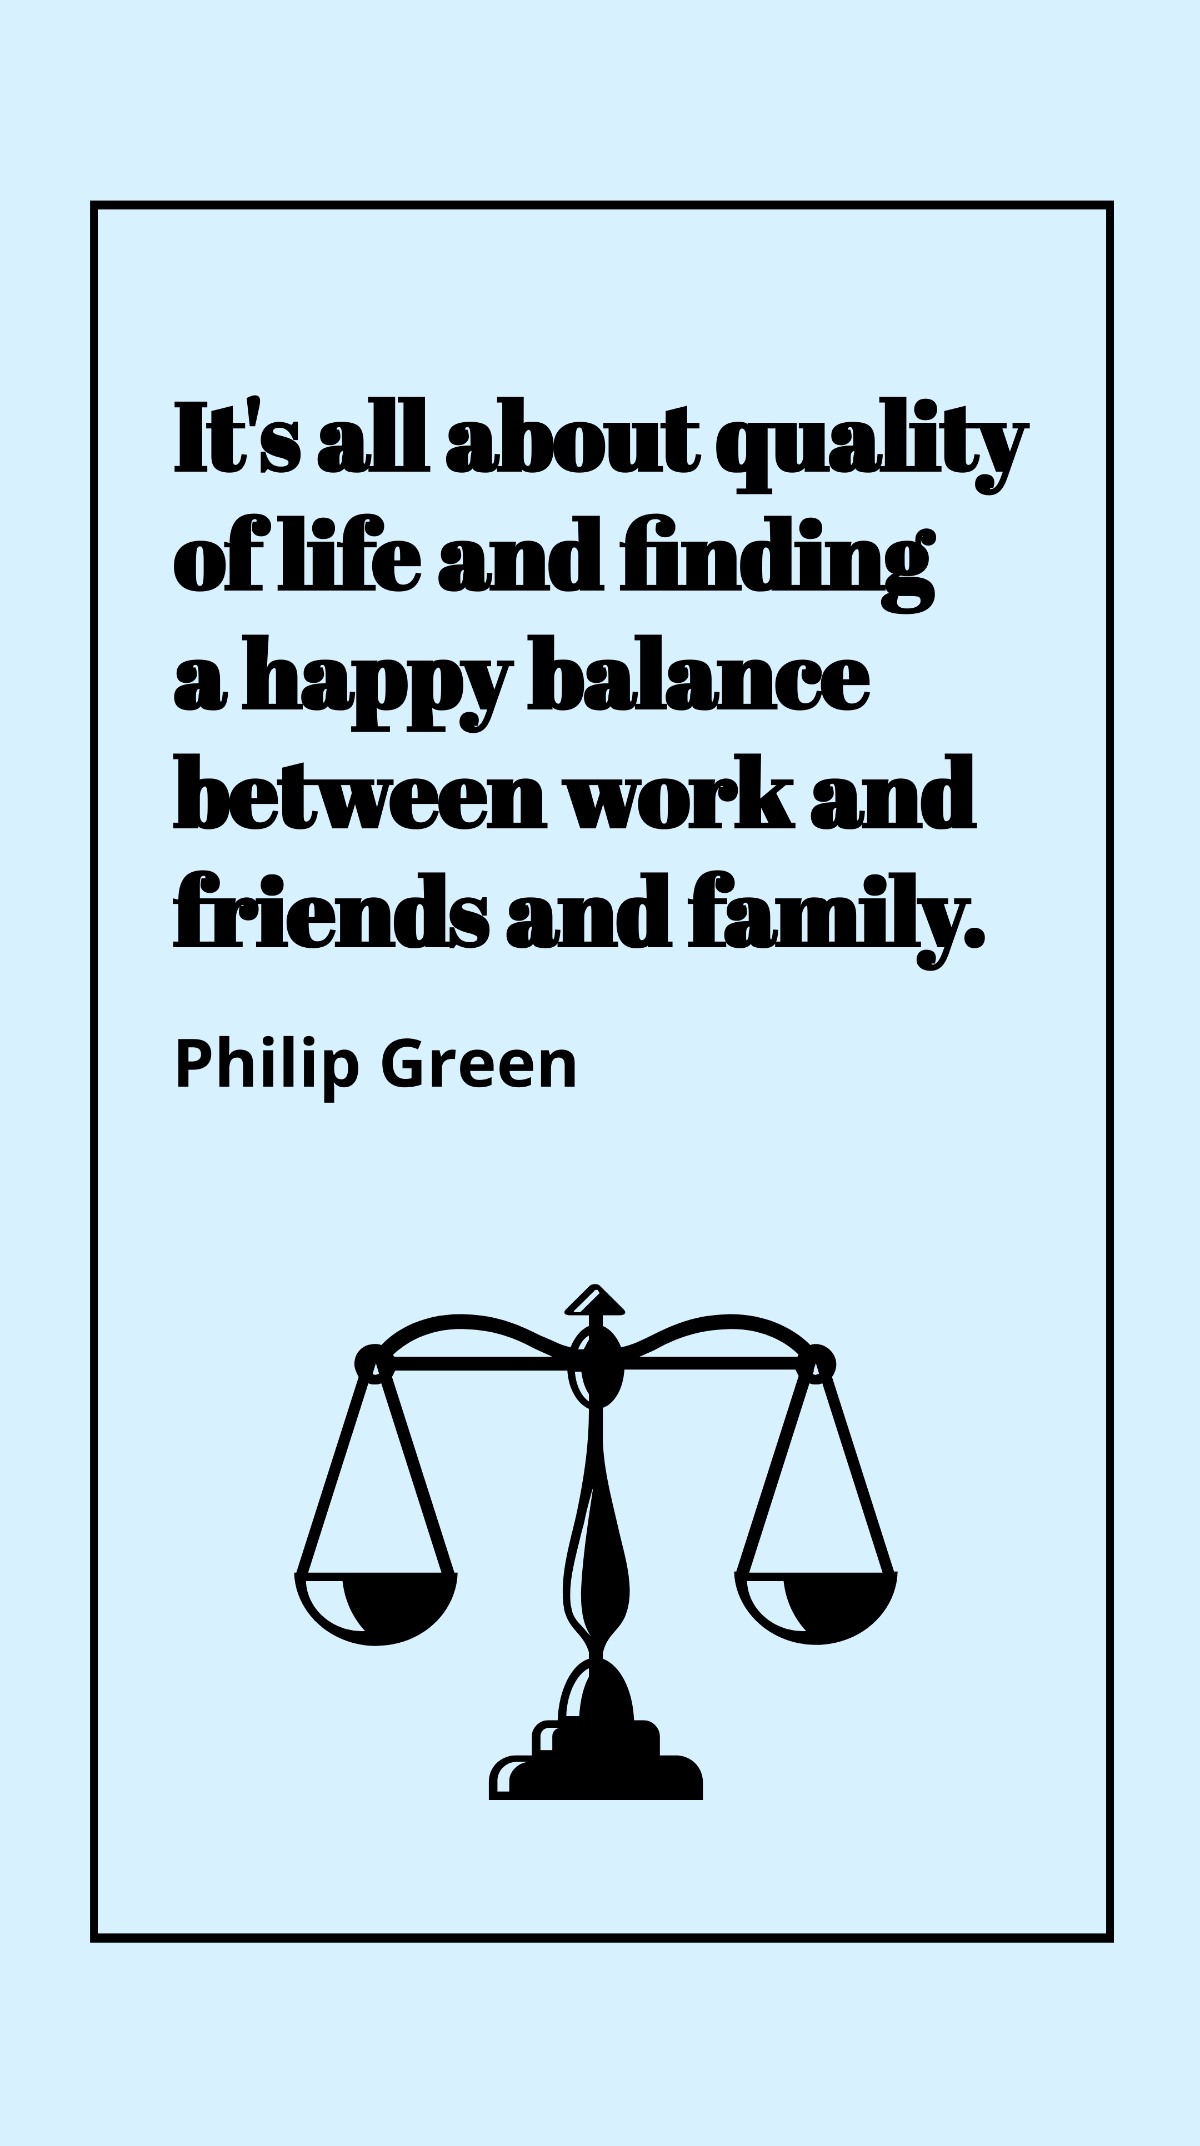 Philip Green - It's all about quality of life and finding a happy balance between work and friends and family.